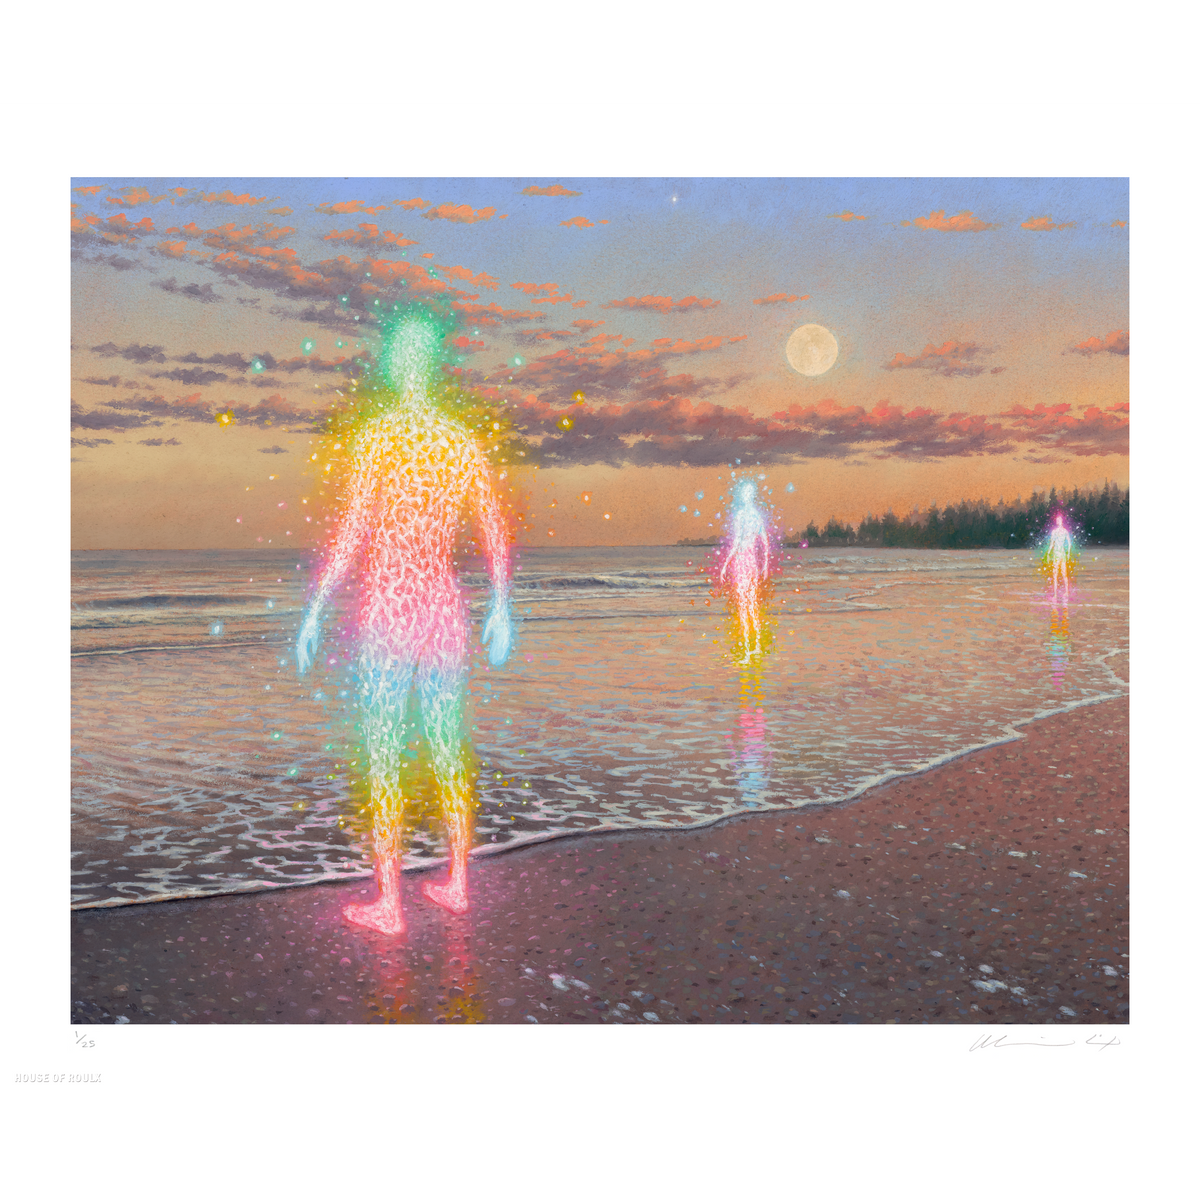 Adrian Cox &quot;The Lost Spectral Witnesses IV&quot; - Archival Print, Limited Edition of 25 - 14 x 17&quot;